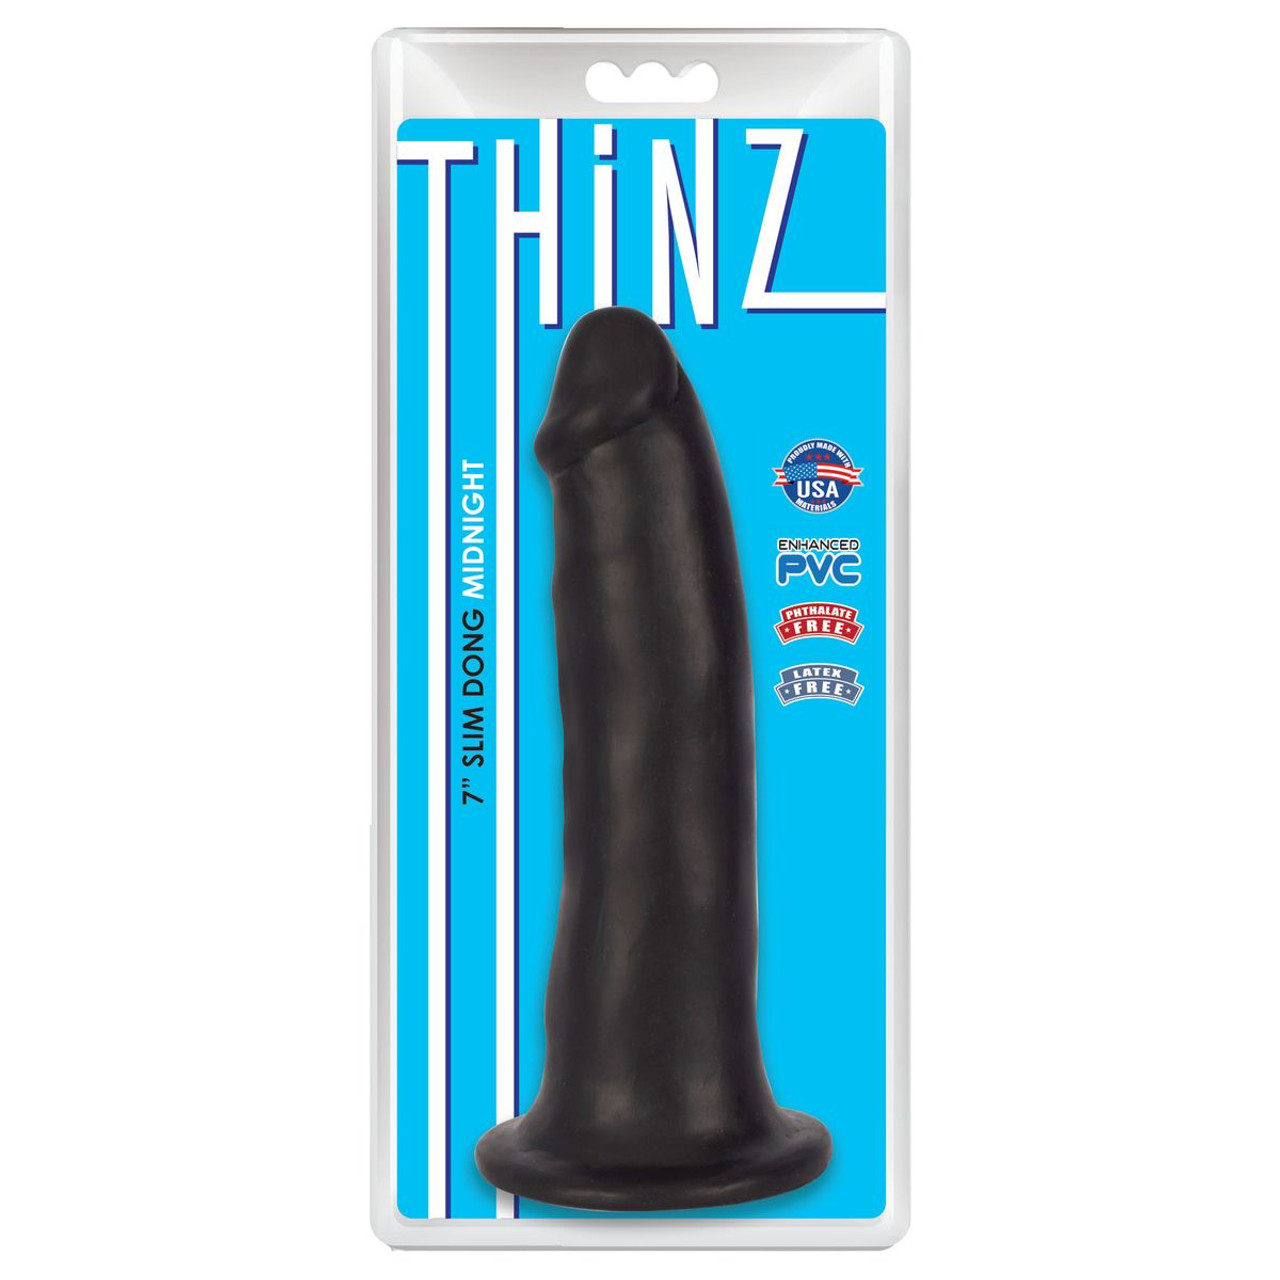 Thinz 7 Inch Slim Dong product image